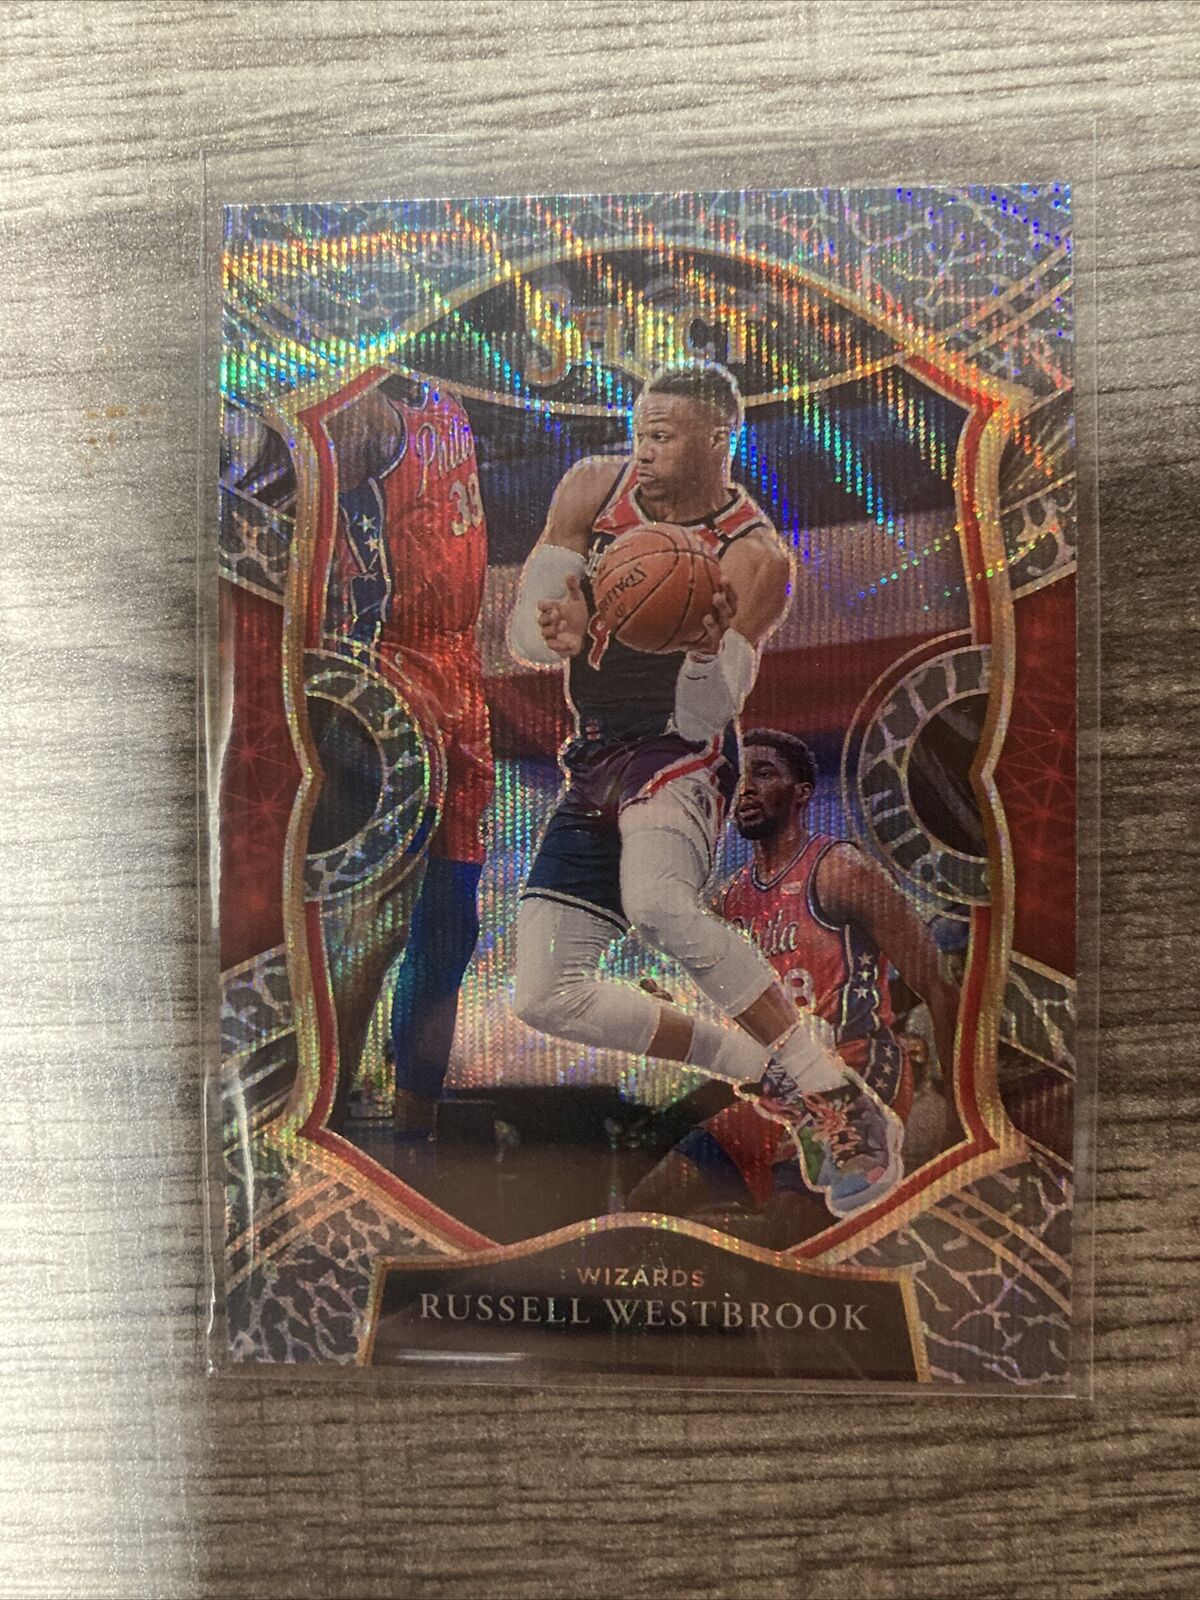 2020-2021 Select Russell westbrook #39 Concourse Level Elephant Skin Card SSP